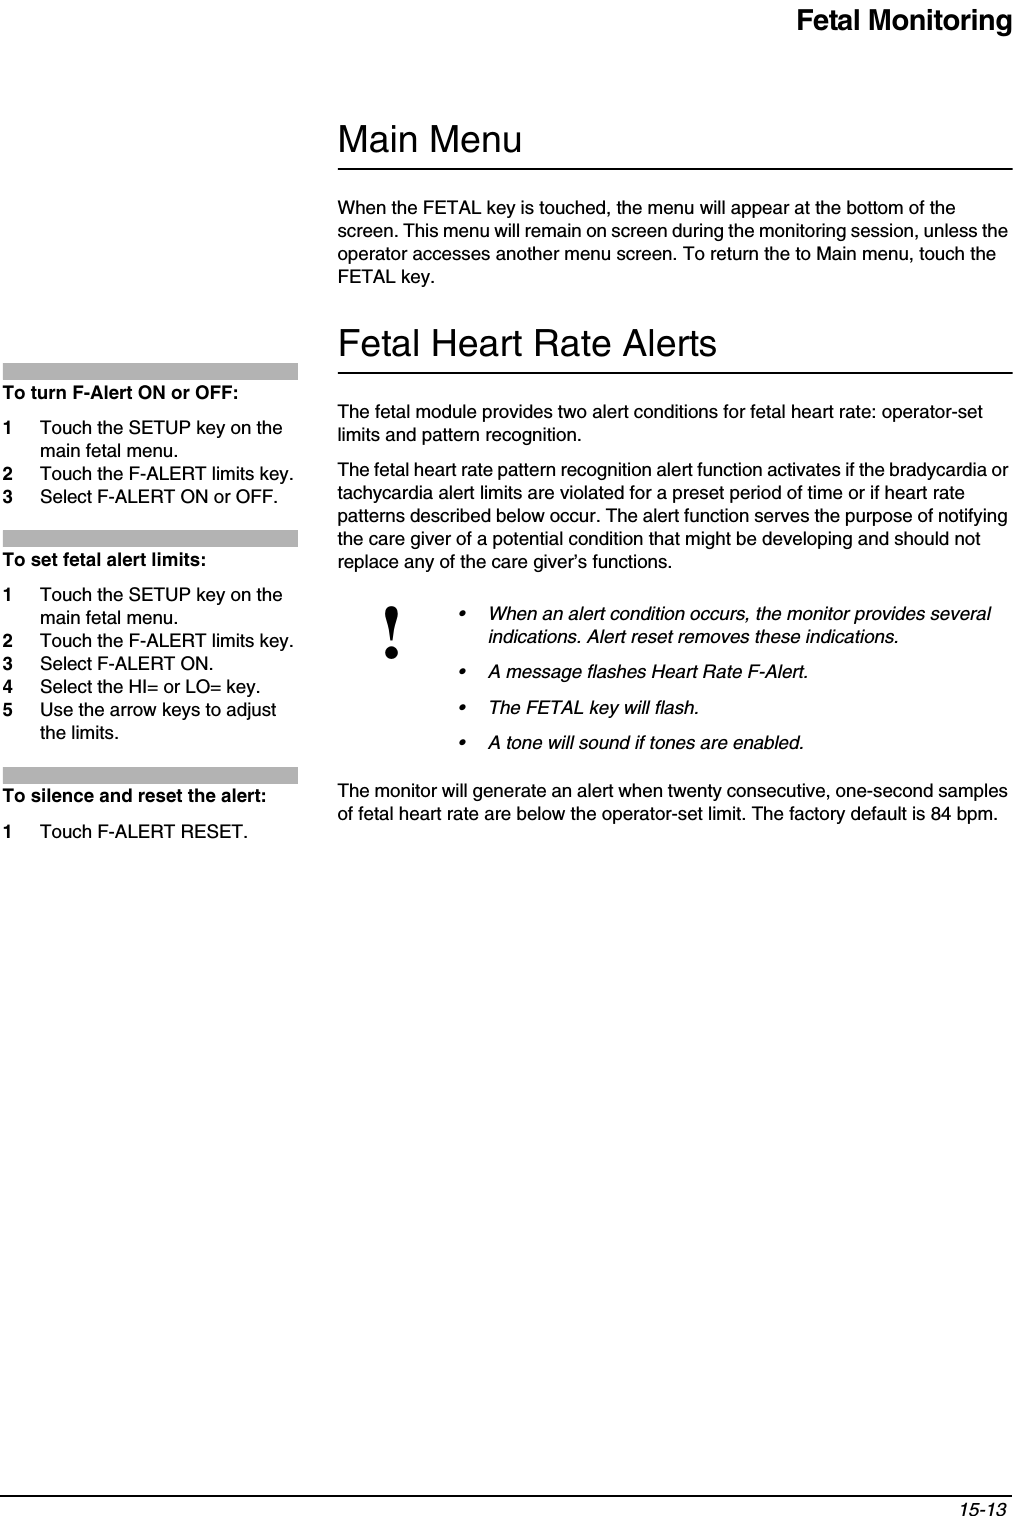 Fetal Monitoring15-13 Main MenuWhen the FETAL key is touched, the menu will appear at the bottom of the screen. This menu will remain on screen during the monitoring session, unless the operator accesses another menu screen. To return the to Main menu, touch the FETAL key.Fetal Heart Rate AlertsThe fetal module provides two alert conditions for fetal heart rate: operator-set limits and pattern recognition.The fetal heart rate pattern recognition alert function activates if the bradycardia or tachycardia alert limits are violated for a preset period of time or if heart rate patterns described below occur. The alert function serves the purpose of notifying the care giver of a potential condition that might be developing and should not replace any of the care giver’s functions. The monitor will generate an alert when twenty consecutive, one-second samples of fetal heart rate are below the operator-set limit. The factory default is 84 bpm.!• When an alert condition occurs, the monitor provides several indications. Alert reset removes these indications.• A message flashes Heart Rate F-Alert.• The FETAL key will flash.• A tone will sound if tones are enabled.To turn F-Alert ON or OFF:1Touch the SETUP key on the main fetal menu.2Touch the F-ALERT limits key.3Select F-ALERT ON or OFF.To set fetal alert limits:1Touch the SETUP key on the main fetal menu.2Touch the F-ALERT limits key.3Select F-ALERT ON.4Select the HI= or LO= key.5Use the arrow keys to adjust the limits.To silence and reset the alert:1Touch F-ALERT RESET.